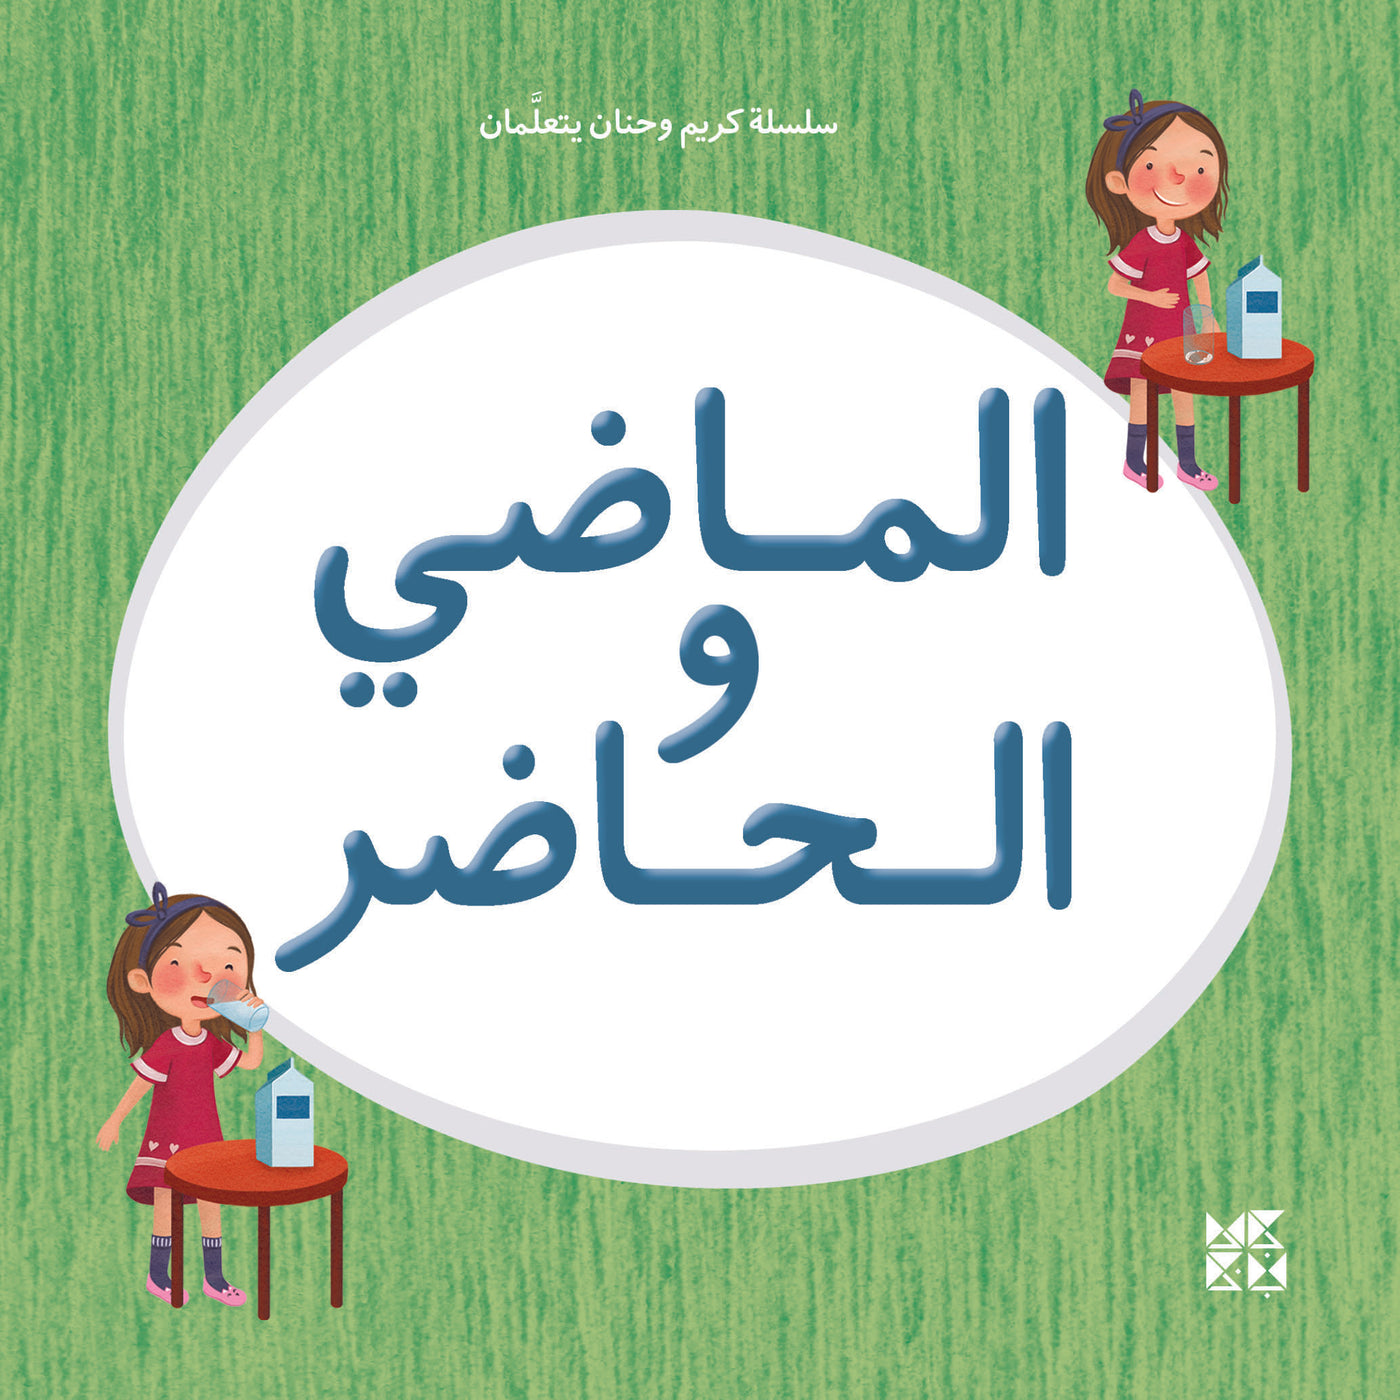 Karim and Hanan Are Learning: Past and Present Book Cover